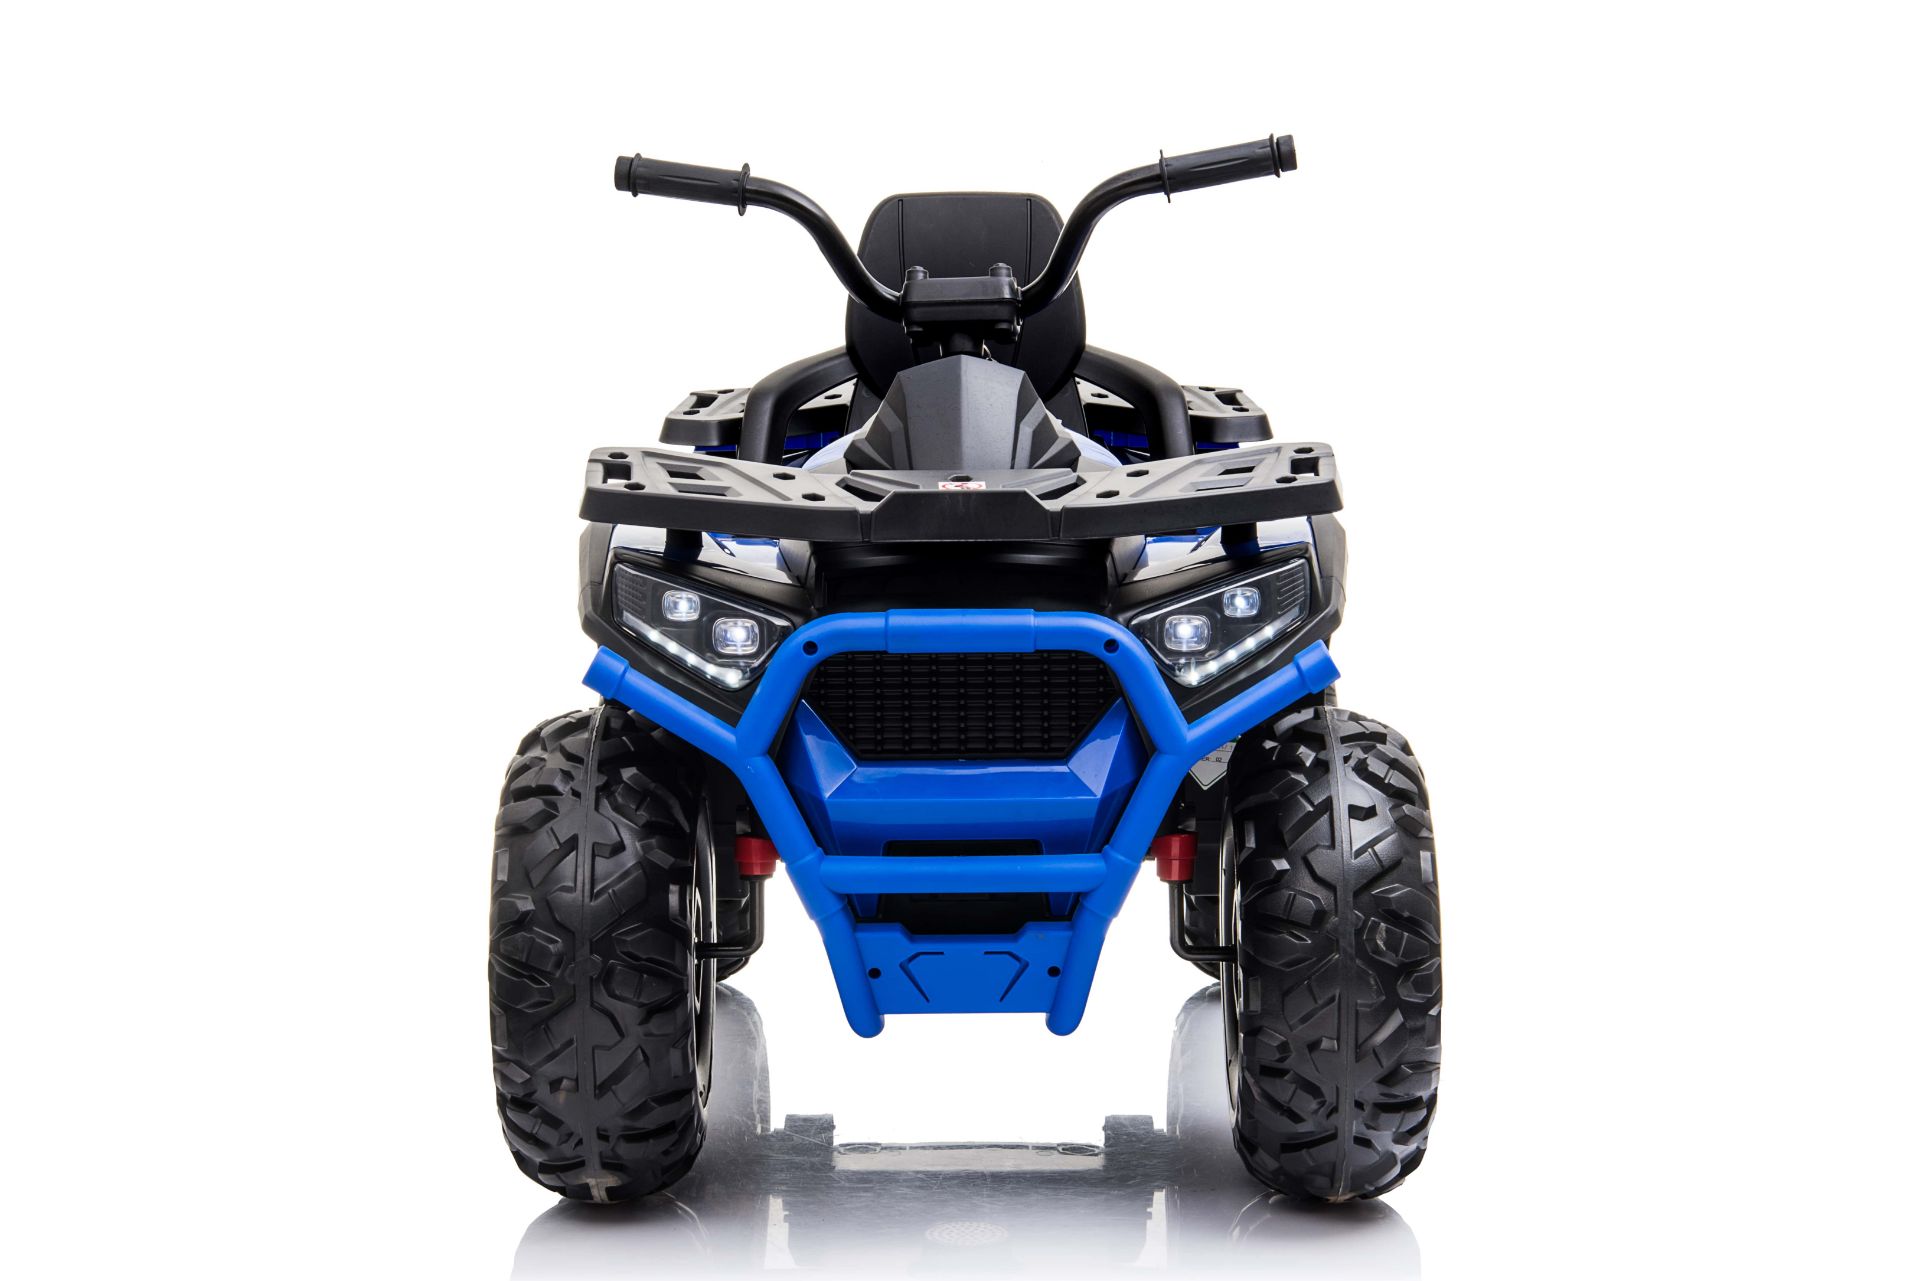 4 x Brand New Ride On Childs Quad Bike 12v with Parental Remote Control - Image 9 of 10